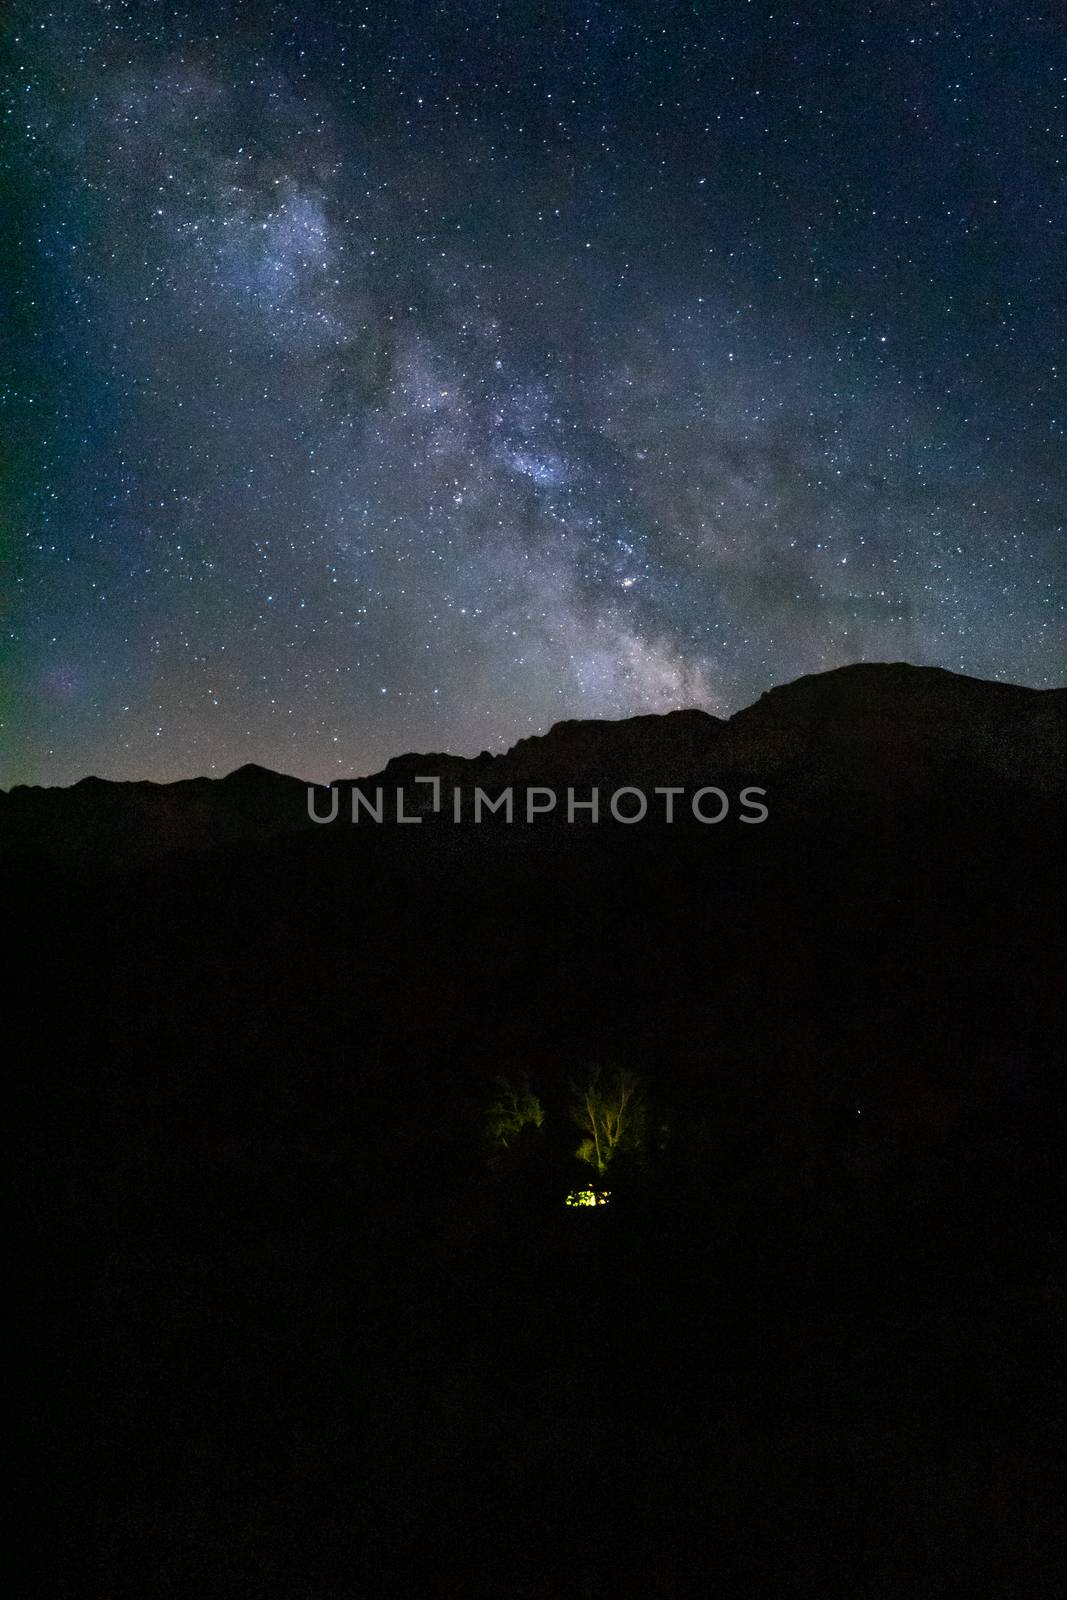 Night light photography of the Milky Way by Dumblinfilms